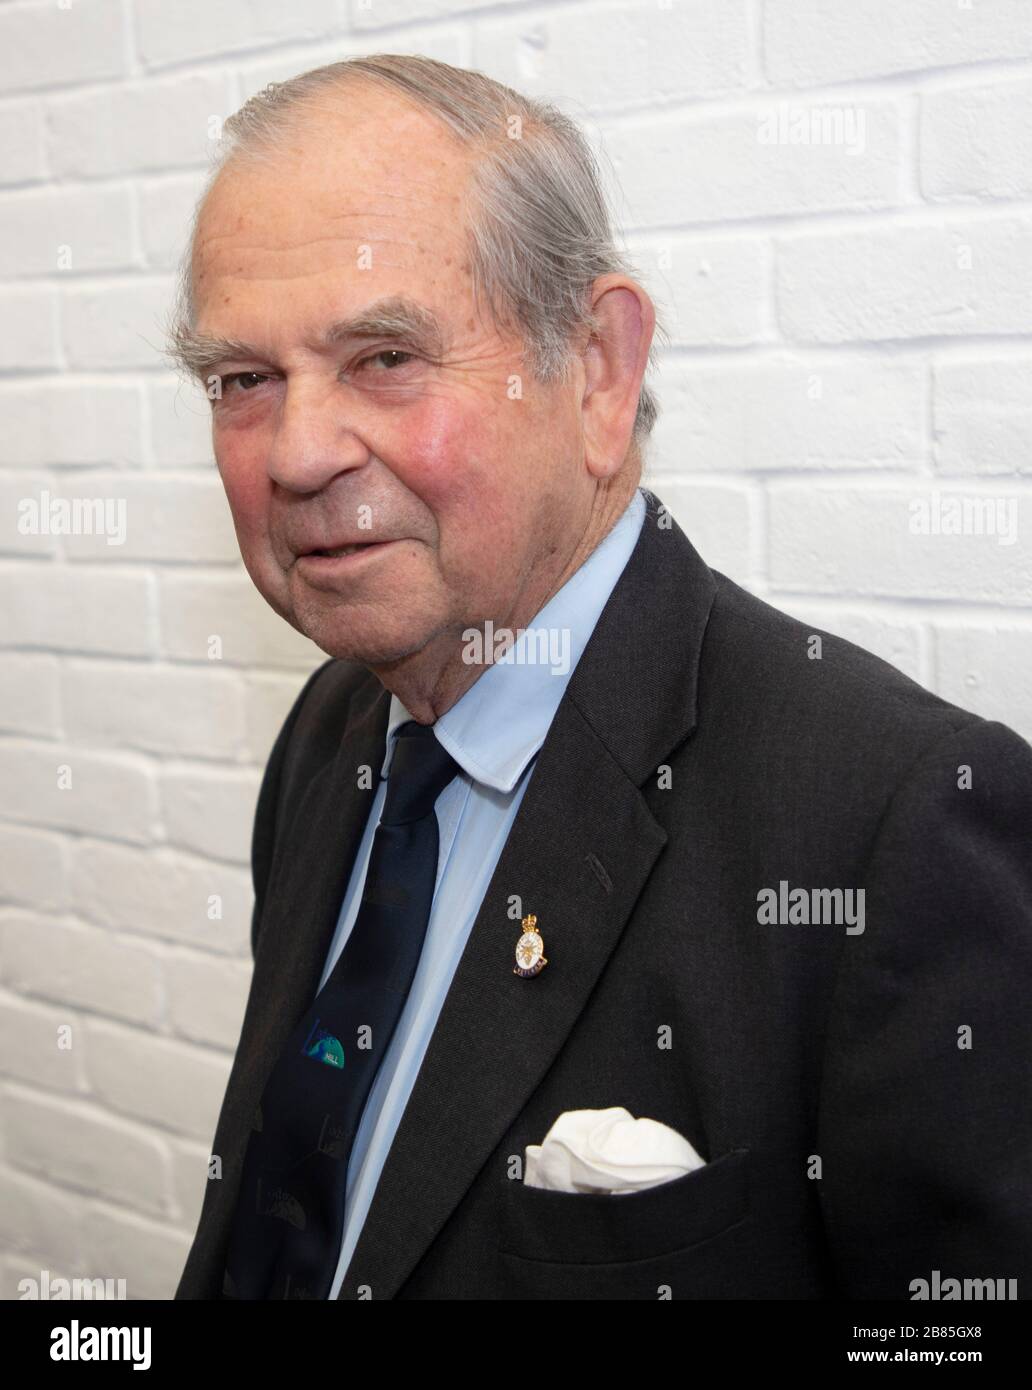 Sir Brian Barttelot At a charity event Stock Photo